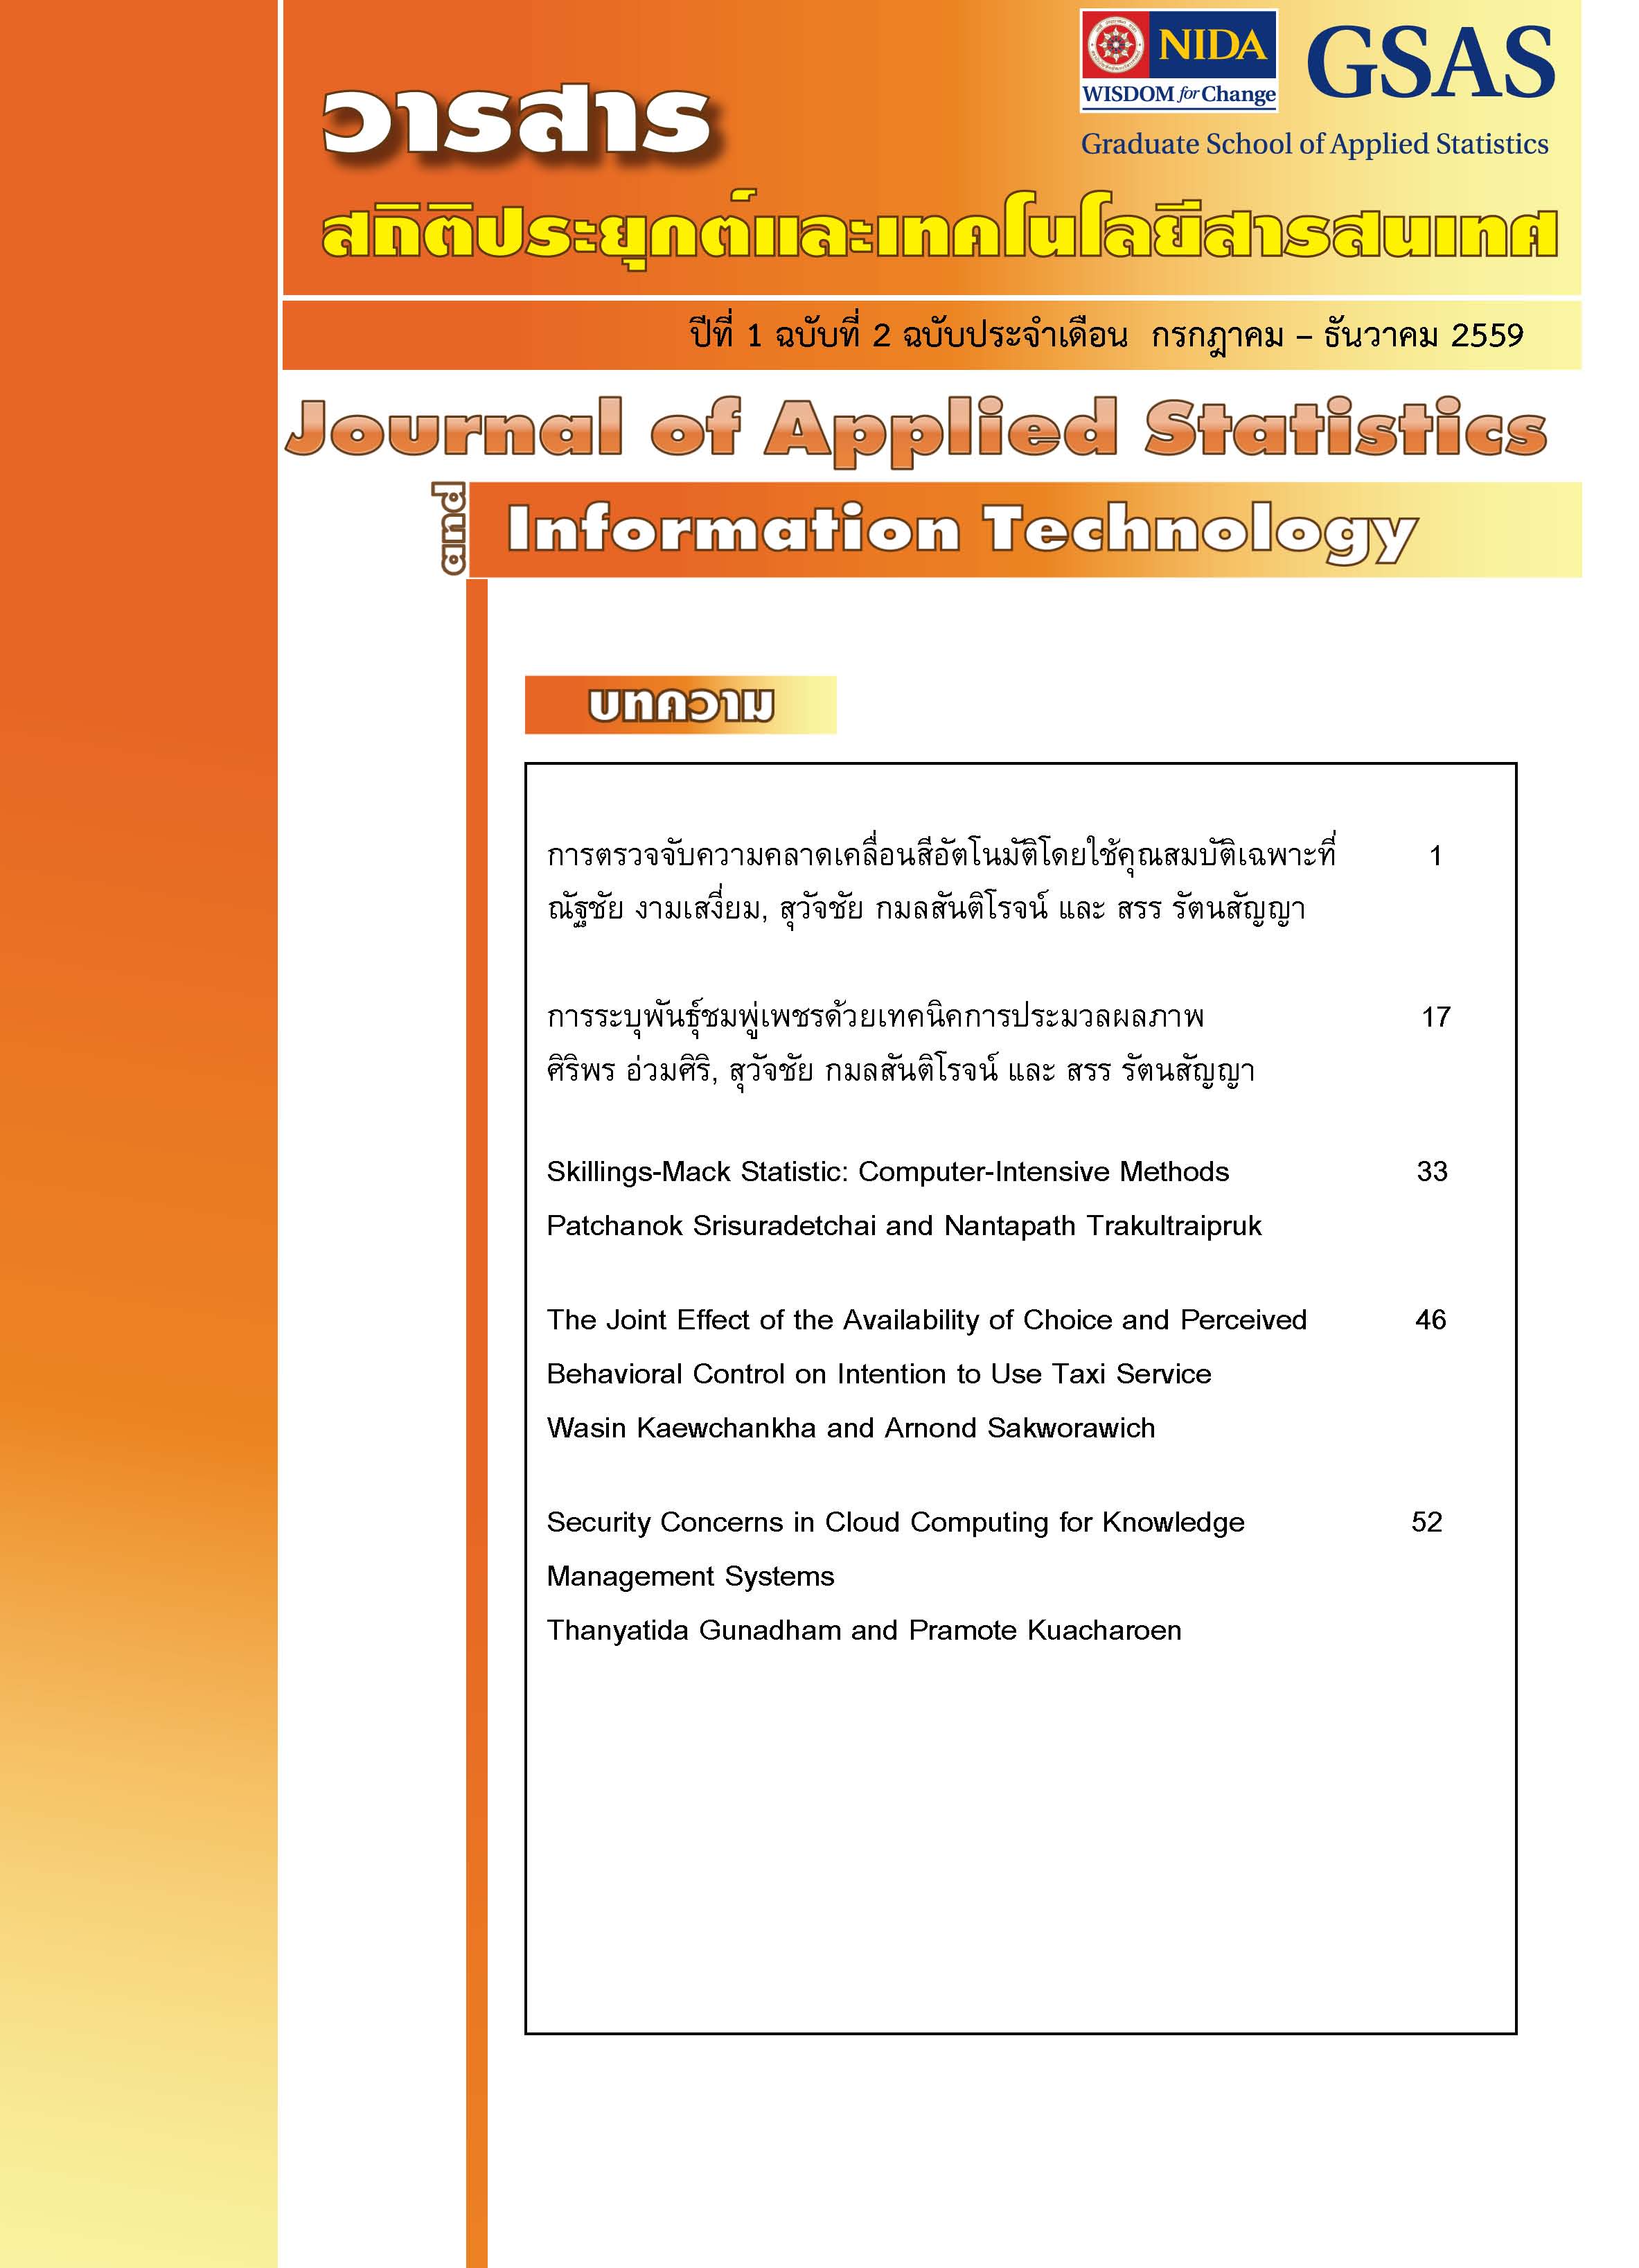 					View Vol. 1 No. 2 (2016): Journal of Applied Statistics and Information Technology Vol1 No2 (July - December 2016)
				